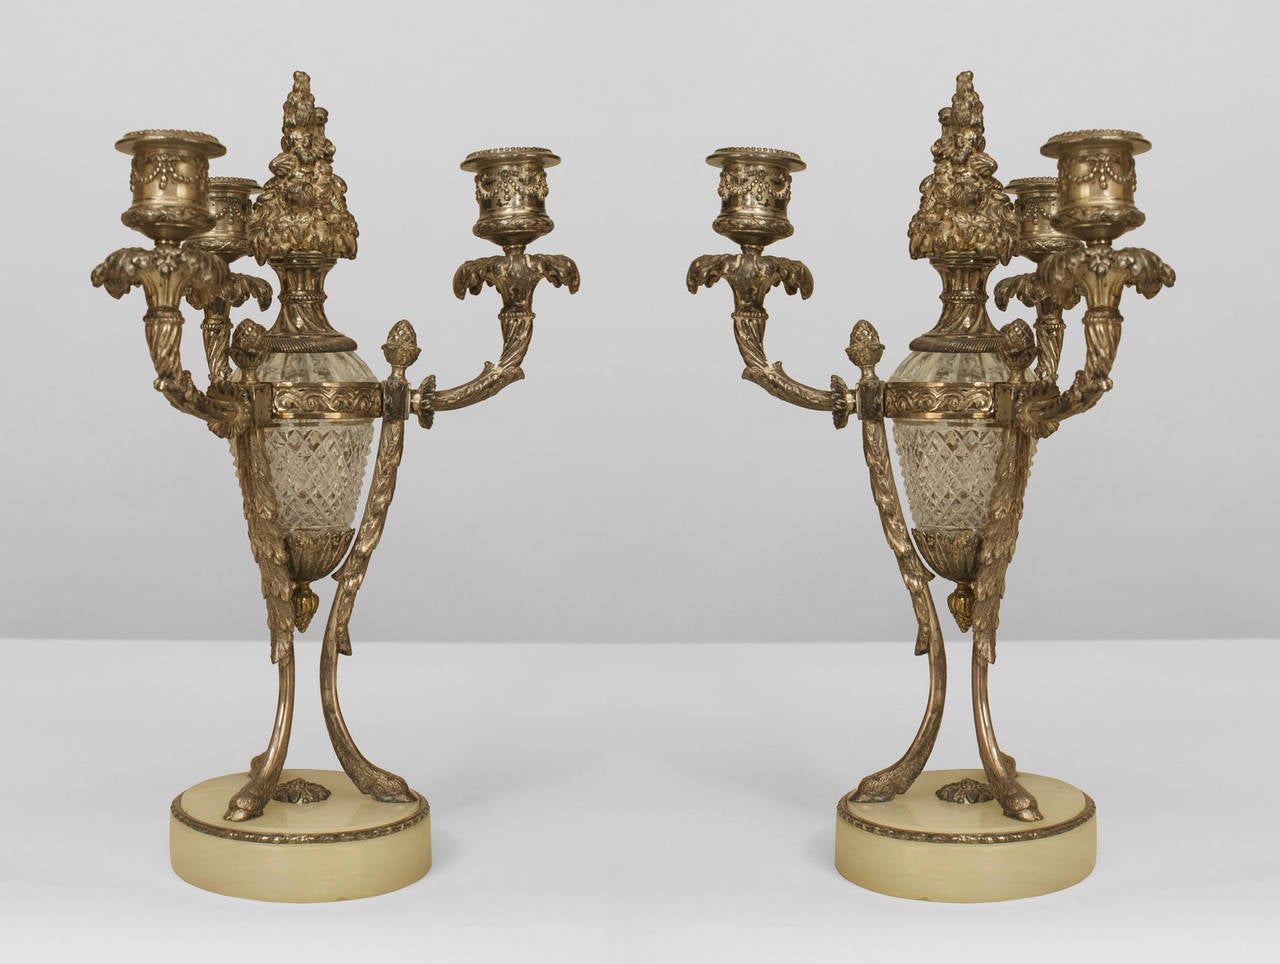 Pair of French Victorian-style silvered bronze and cut glass three-light candelabras resting on a round onyx base. (PRICED AS Pair)
